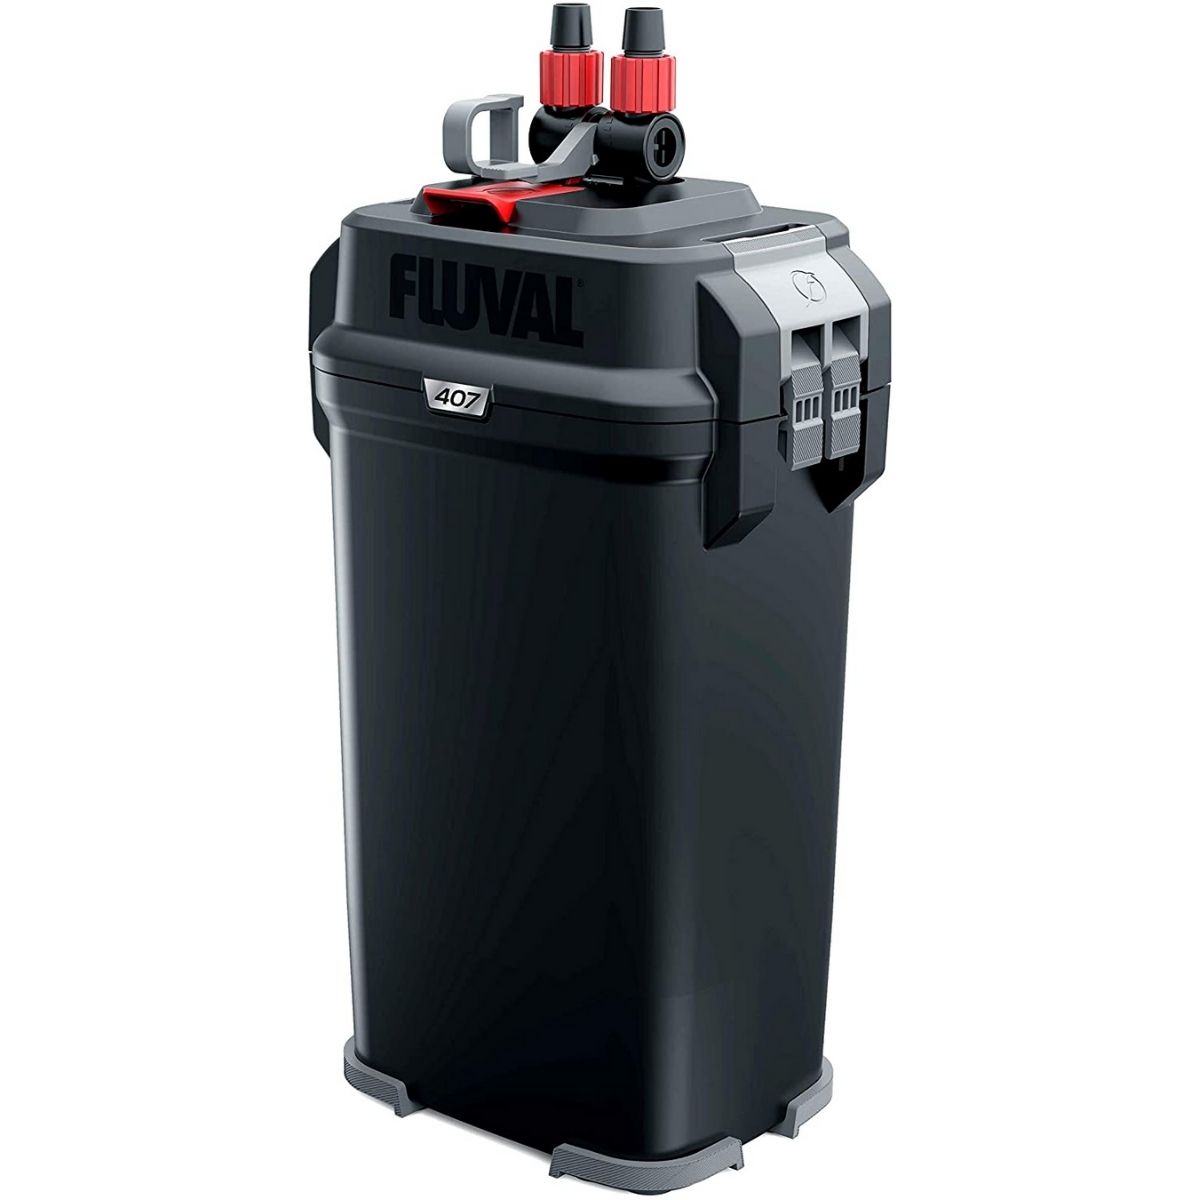 fluval 407 external and canister filter review